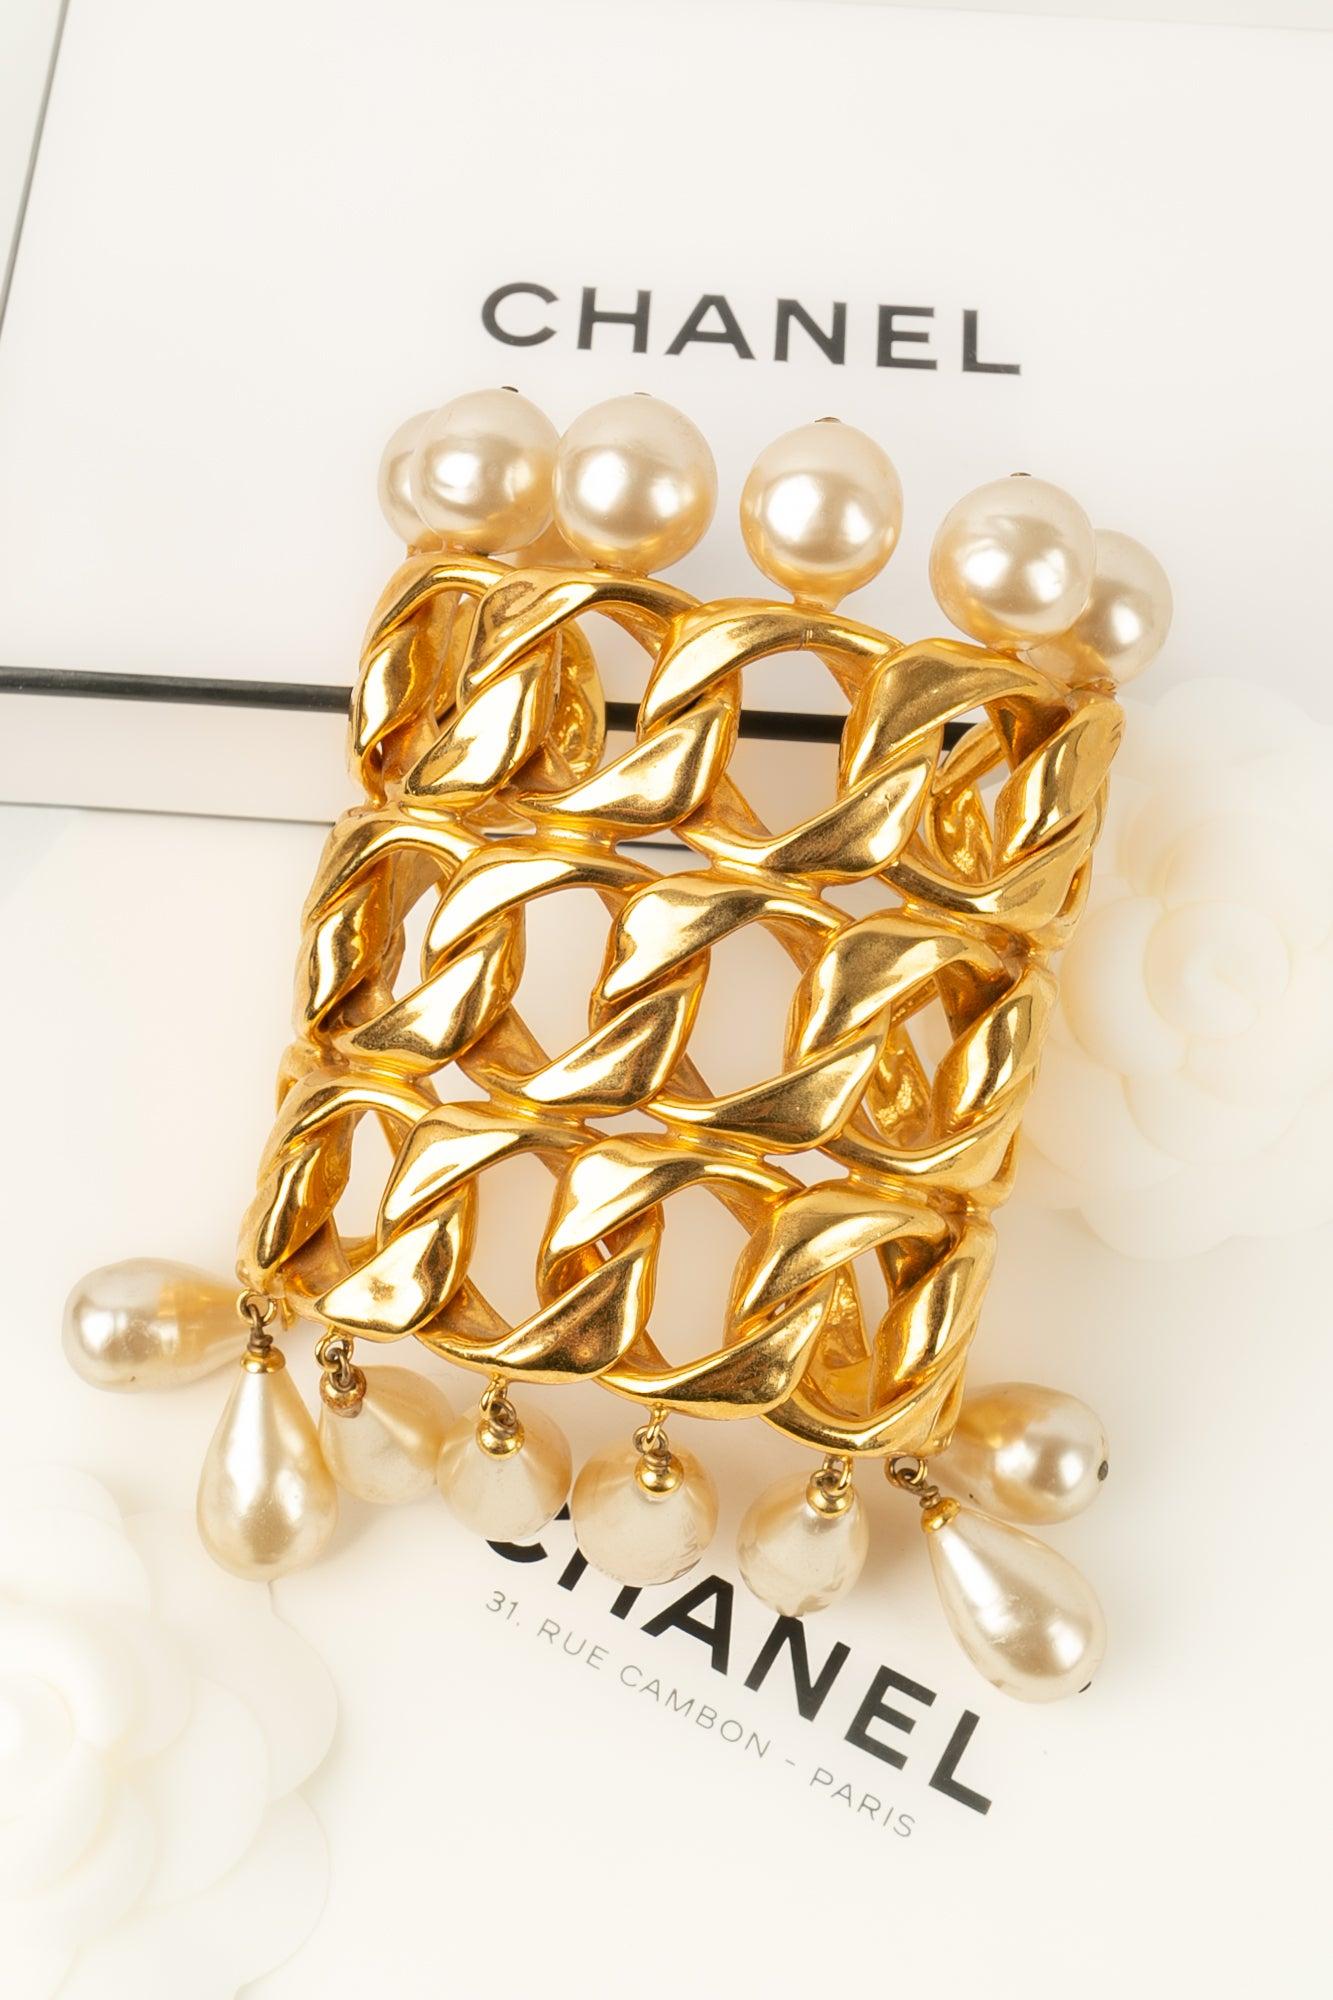 Chanel Cuff Bracelet in Golden Metal, Costume Pearls, and Pearly Drops For Sale 5